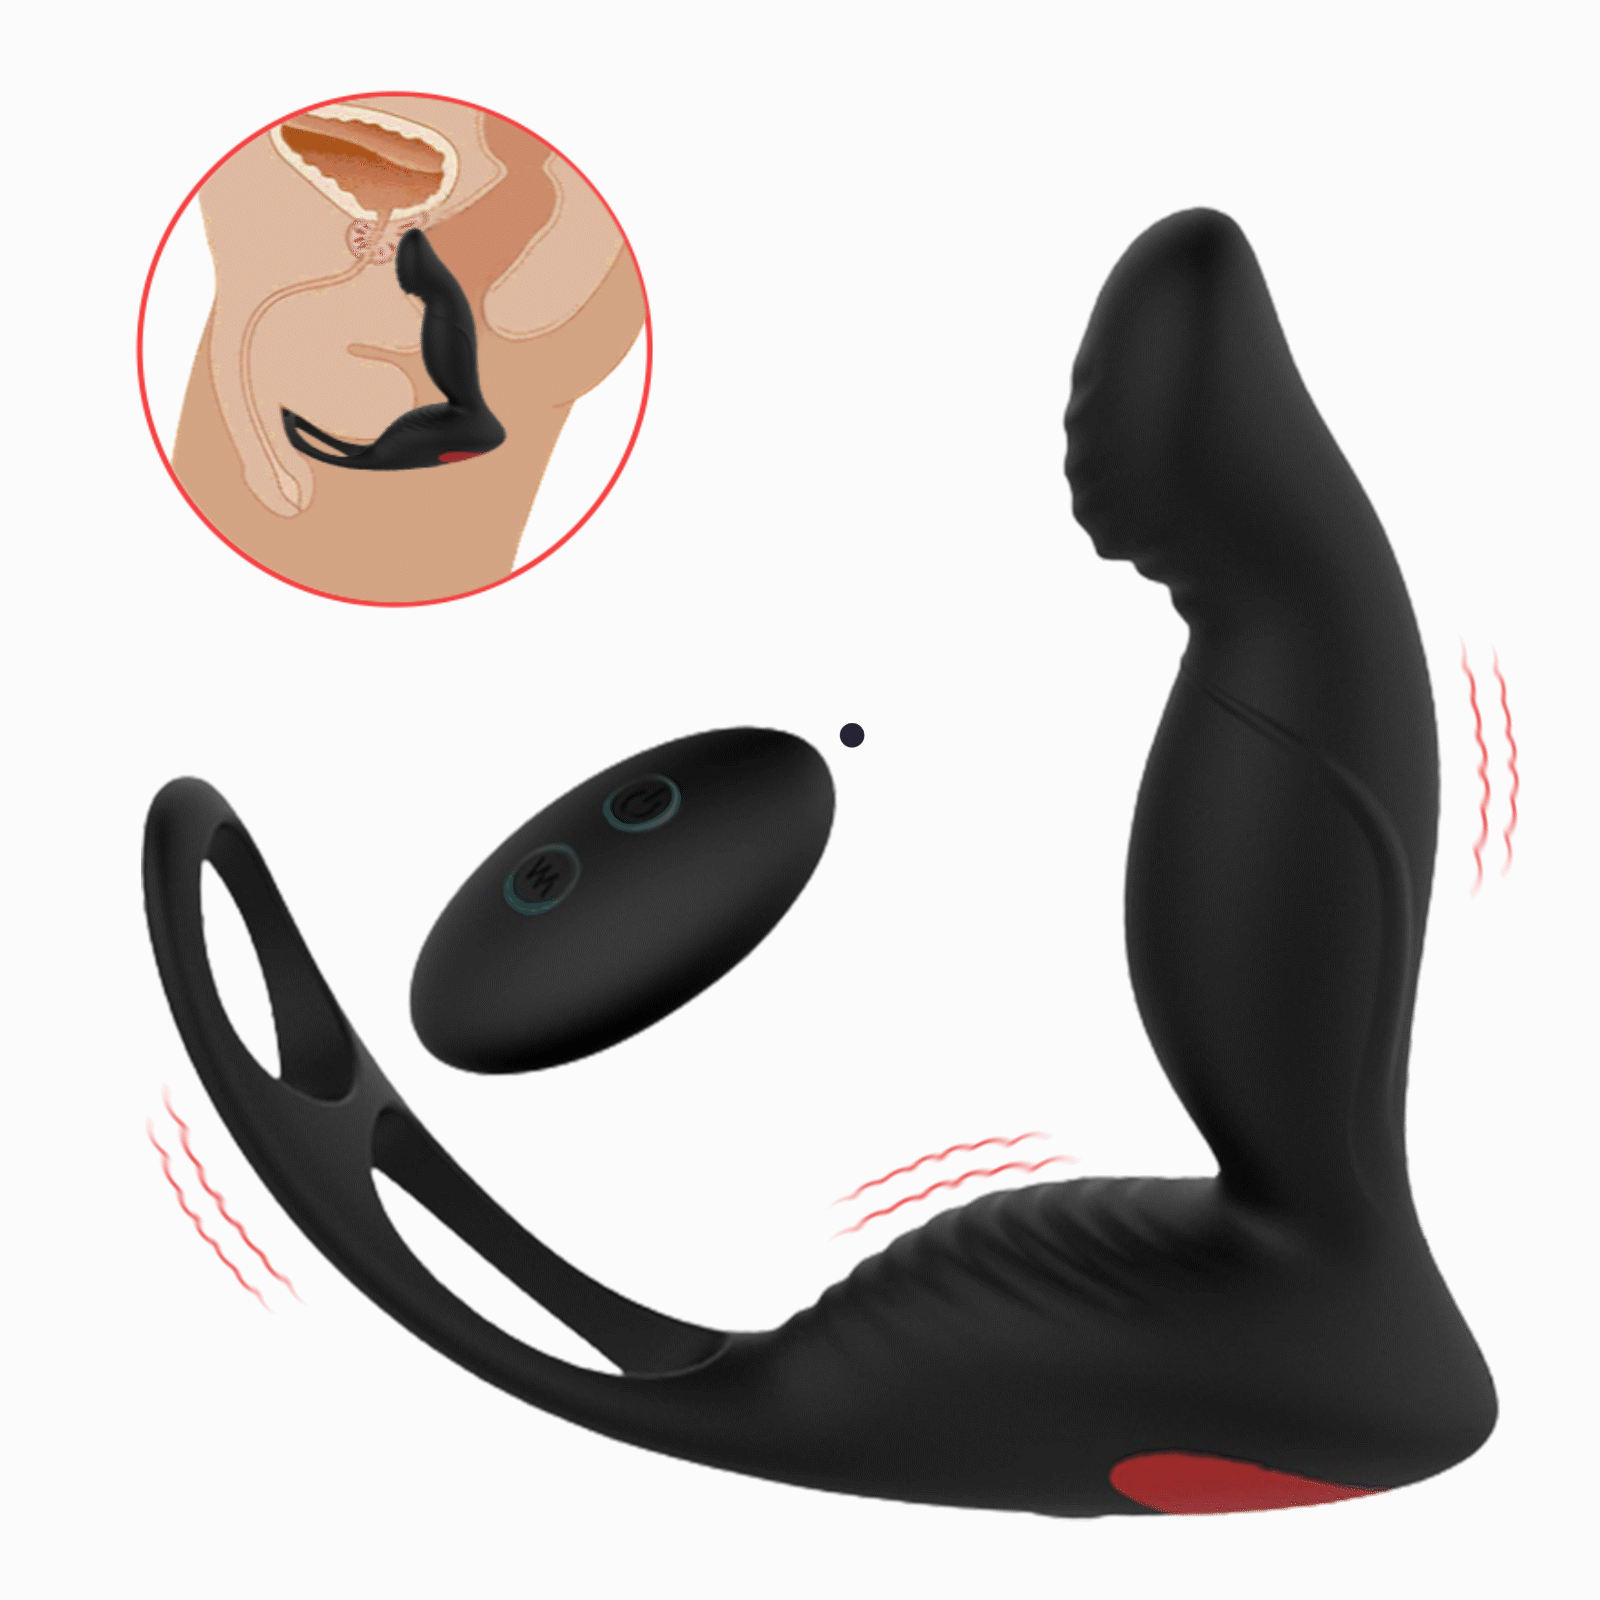 Prostate posterior massager for men——9 frequency vibration